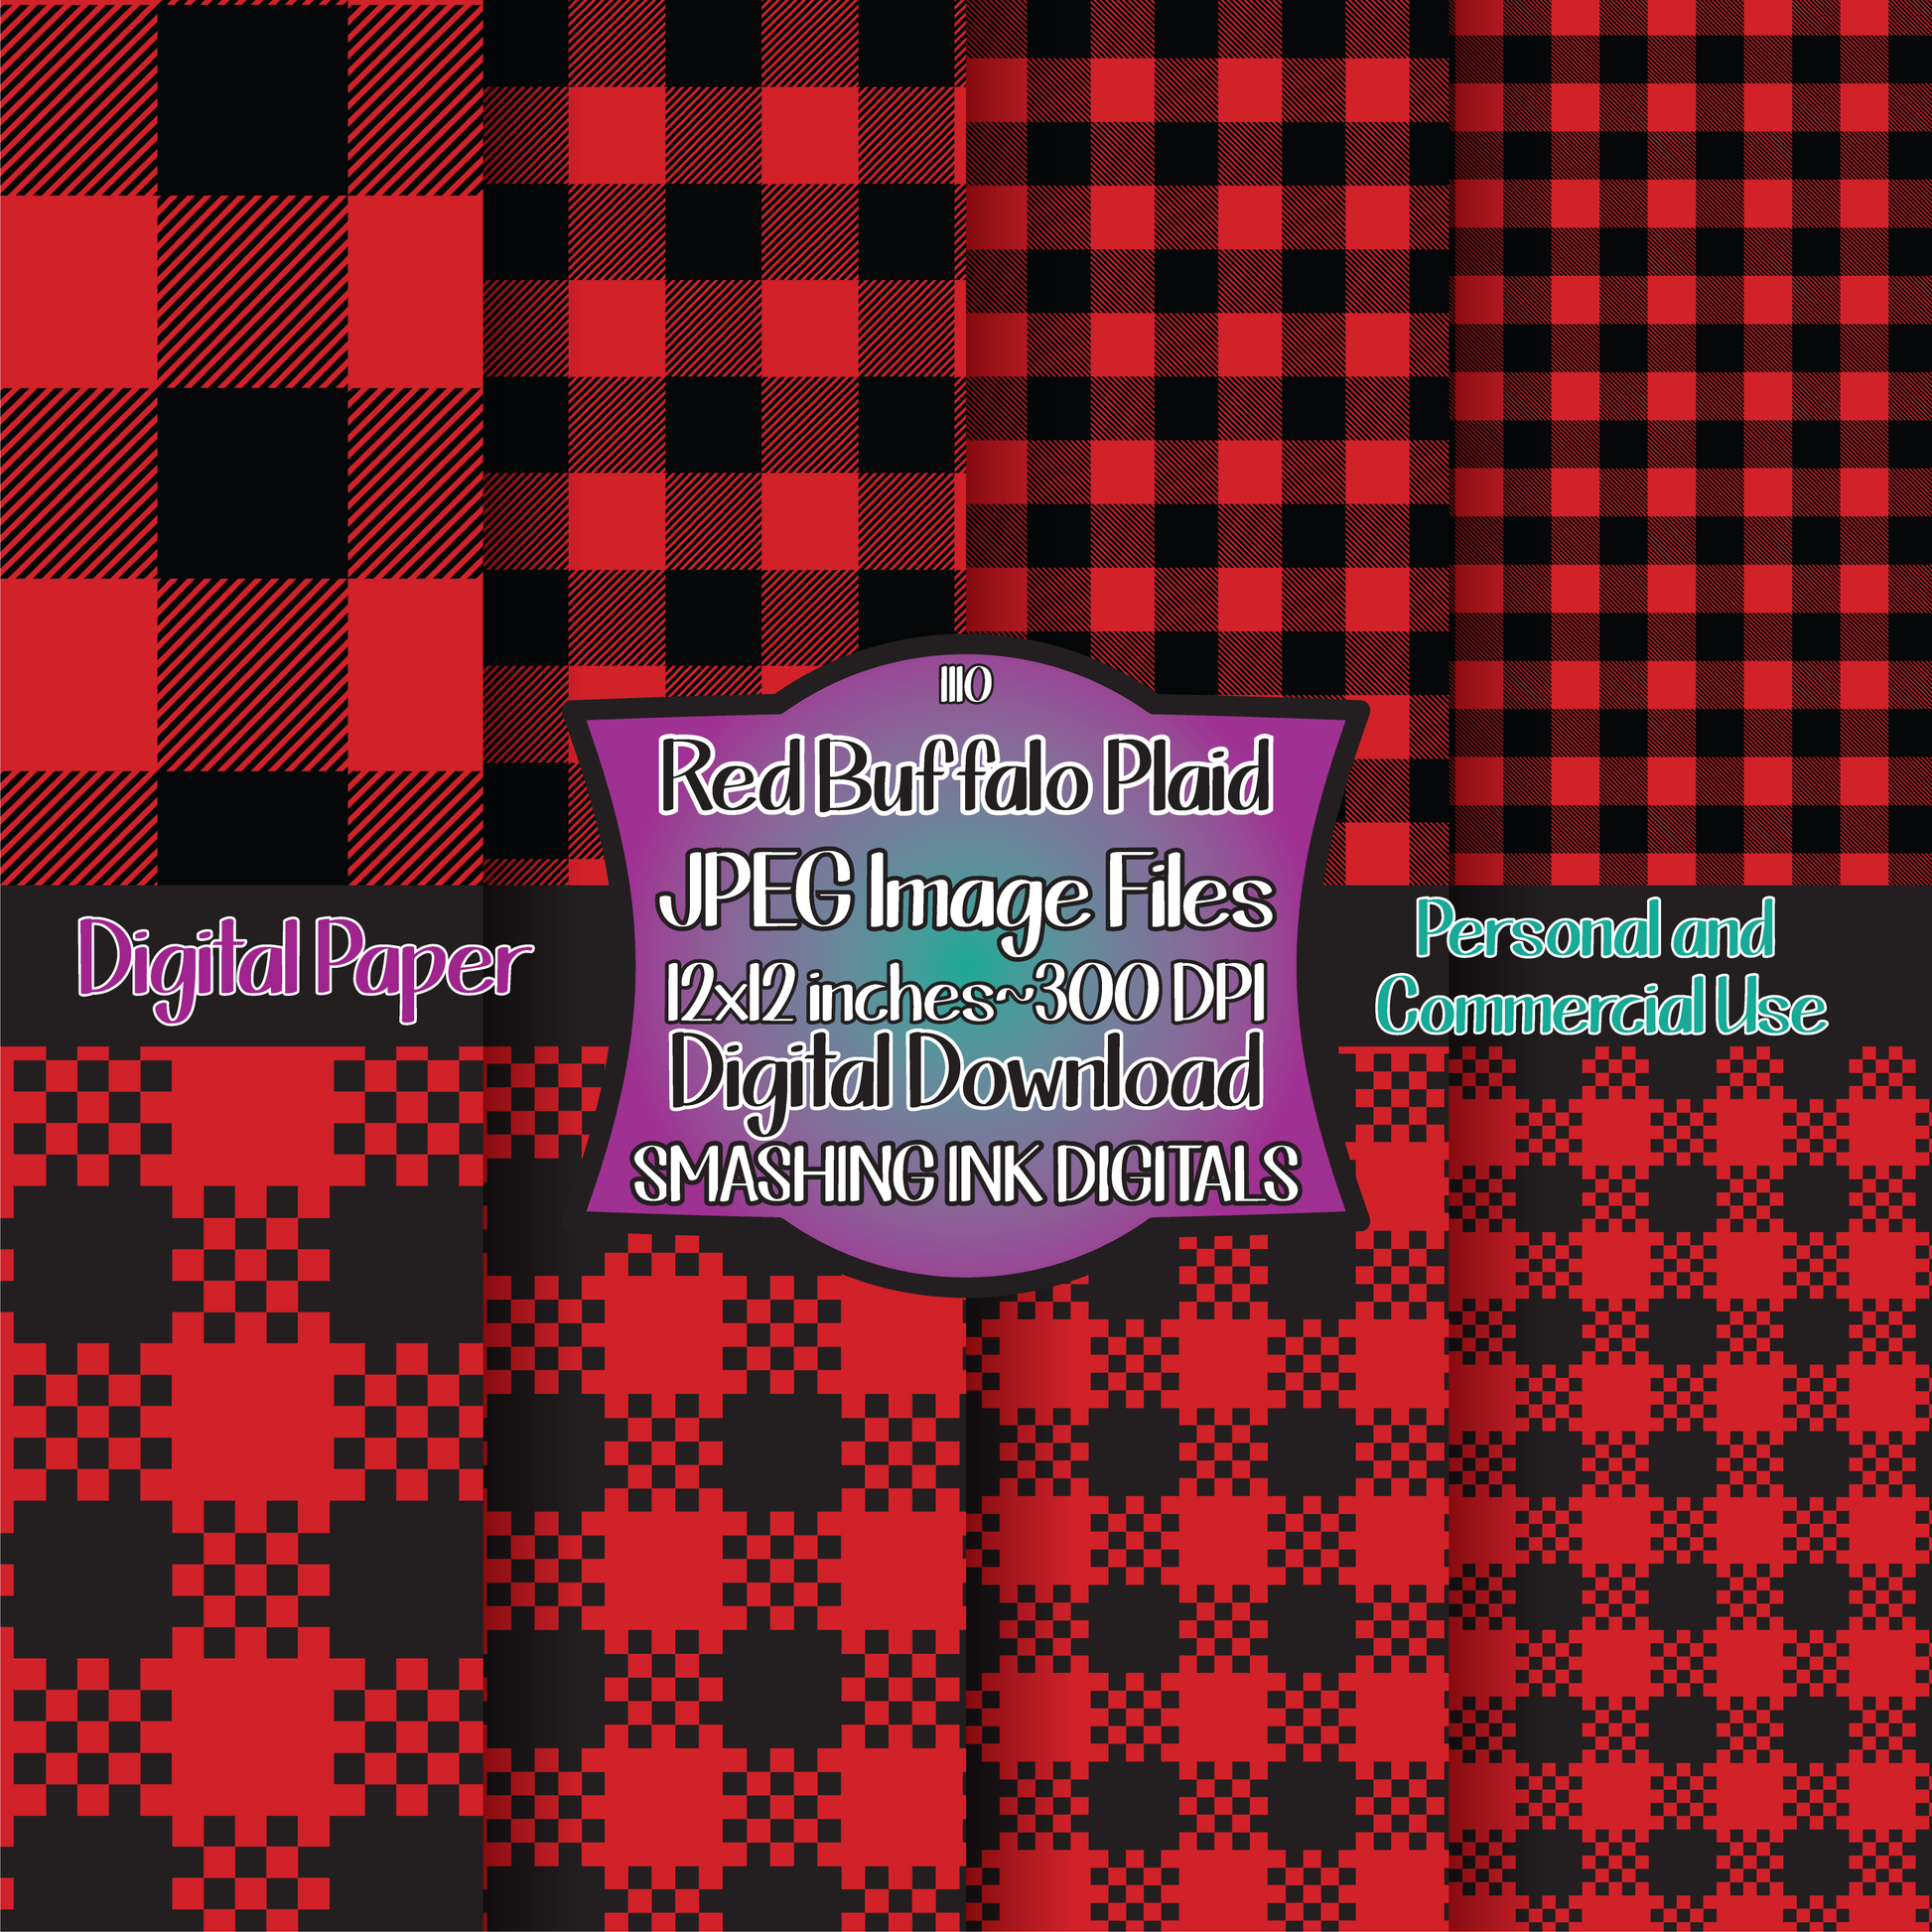 Digital Paper For Scrapbook Archives - Party and Craft Supply